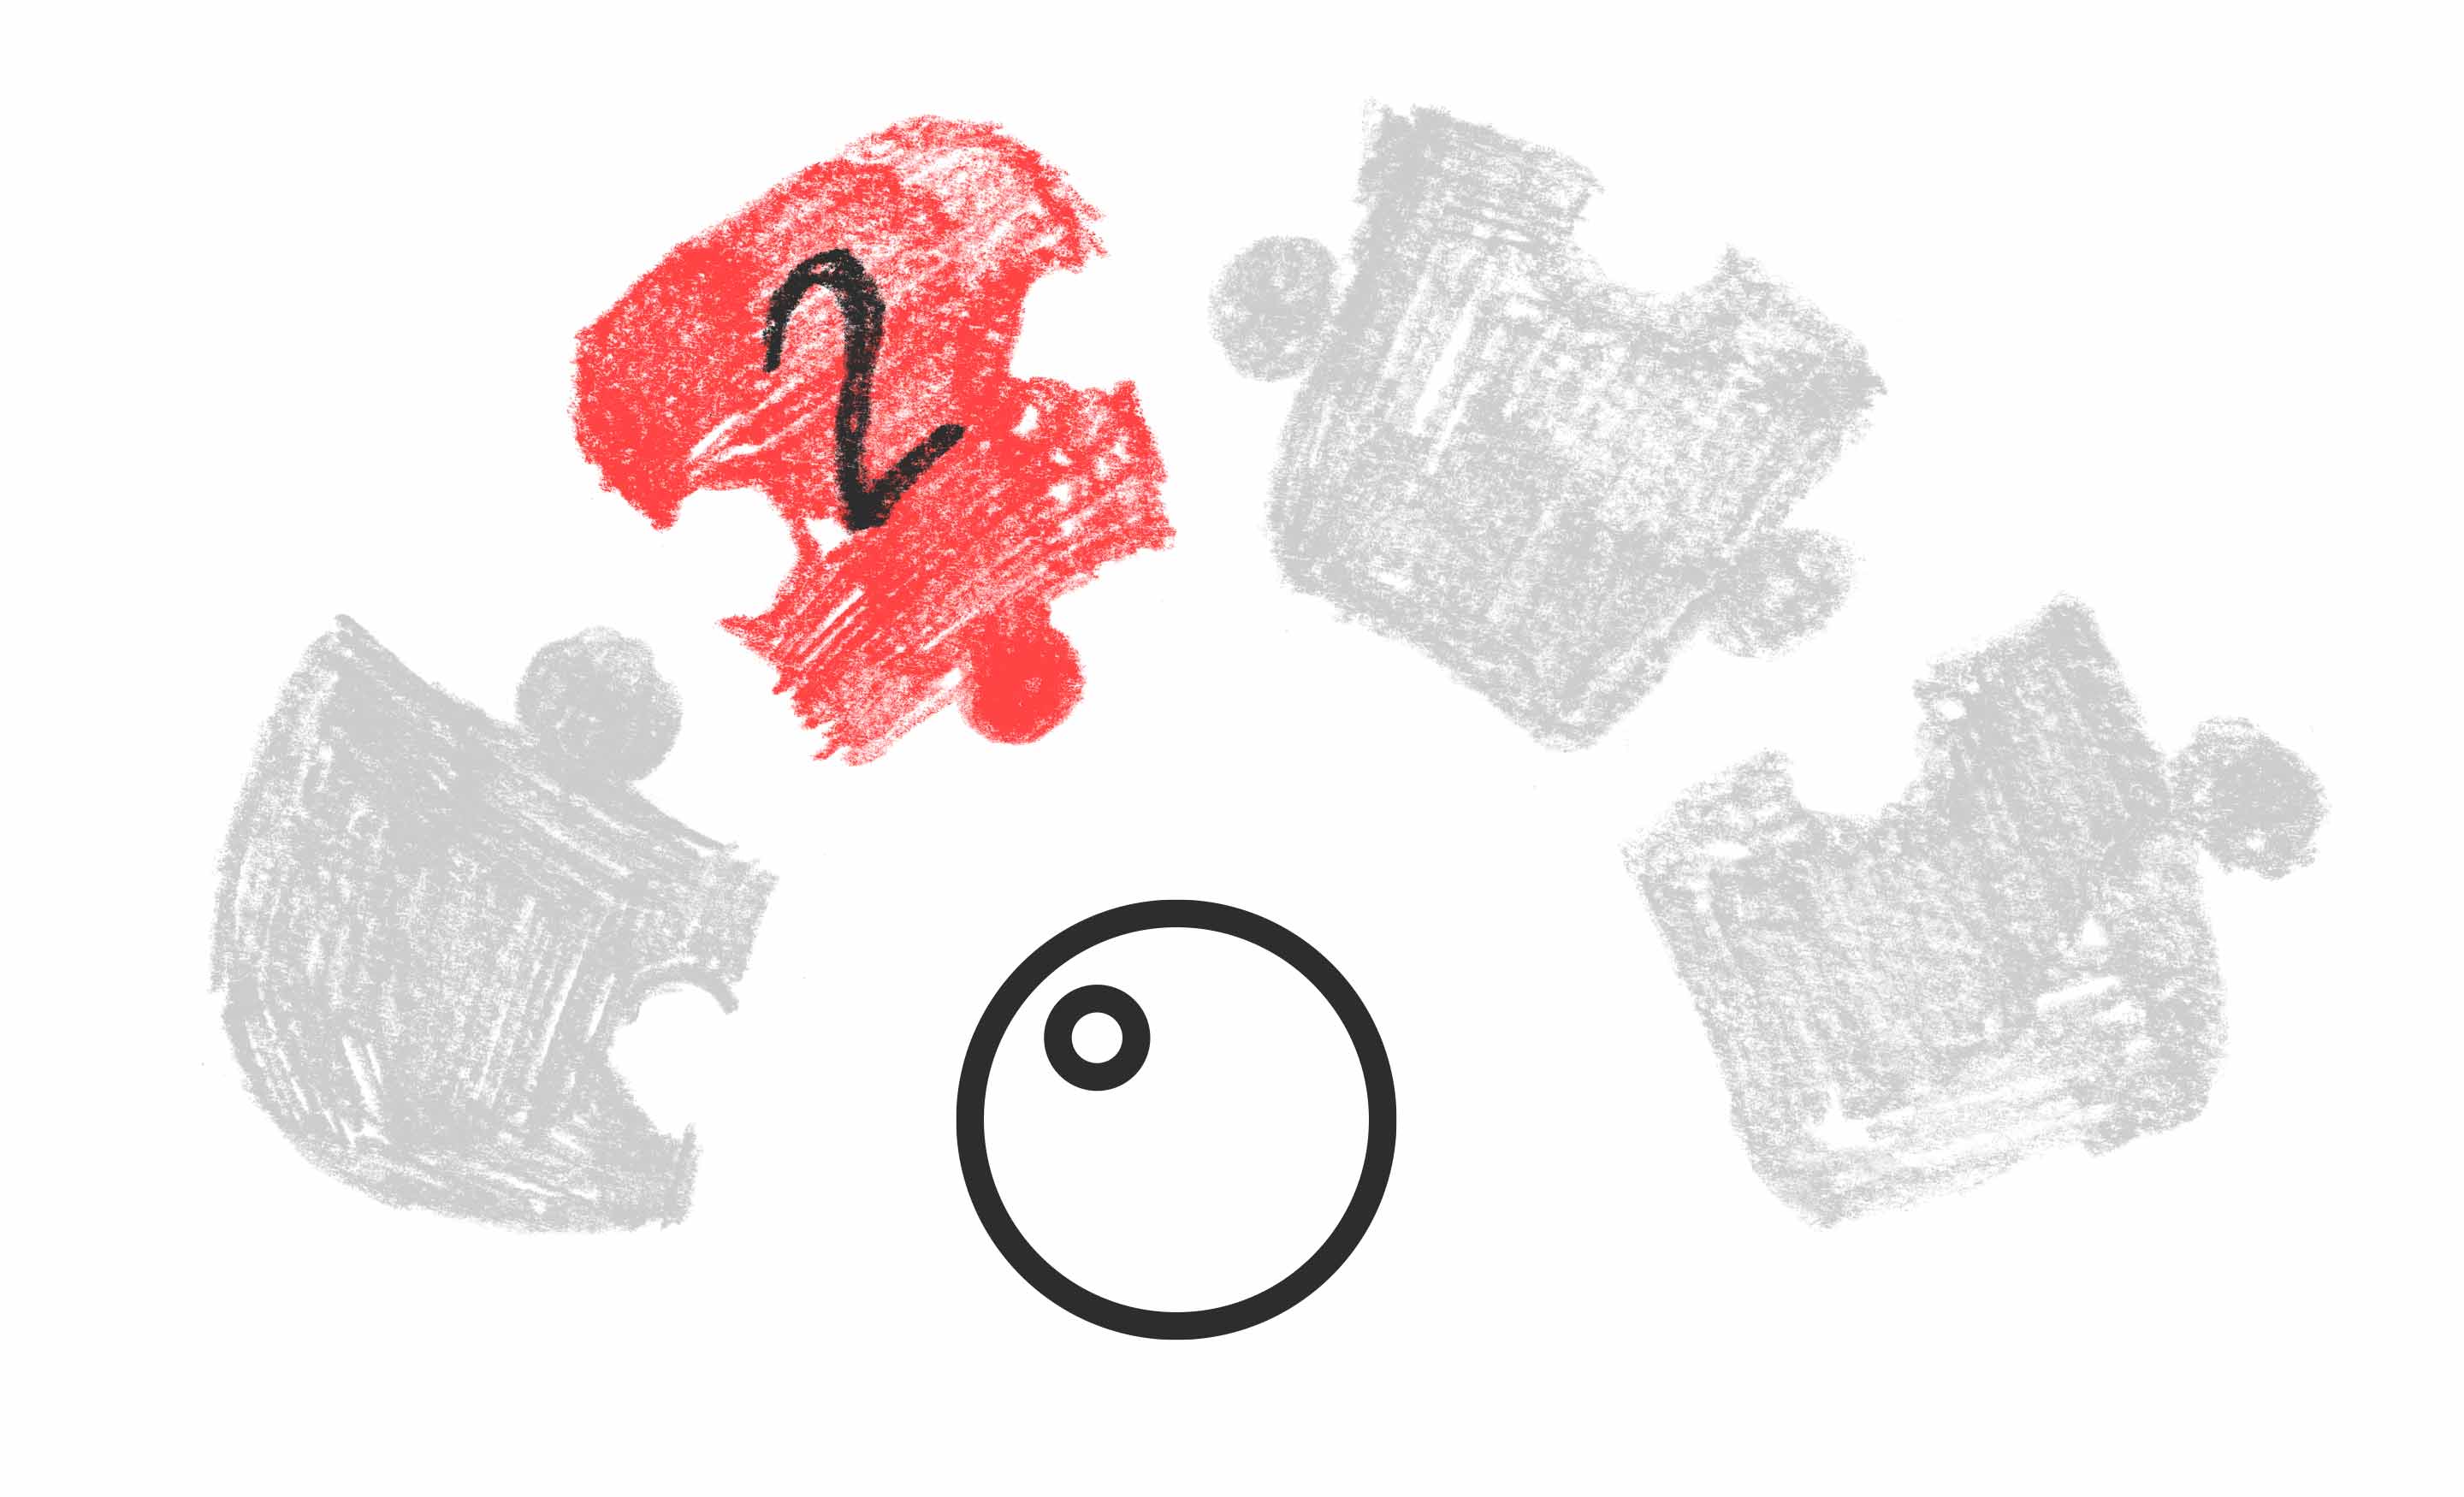 An "Ooh"ing face looks at a red puzzle piece with a "2" on it. Three other puzzle pieces are greyed out.